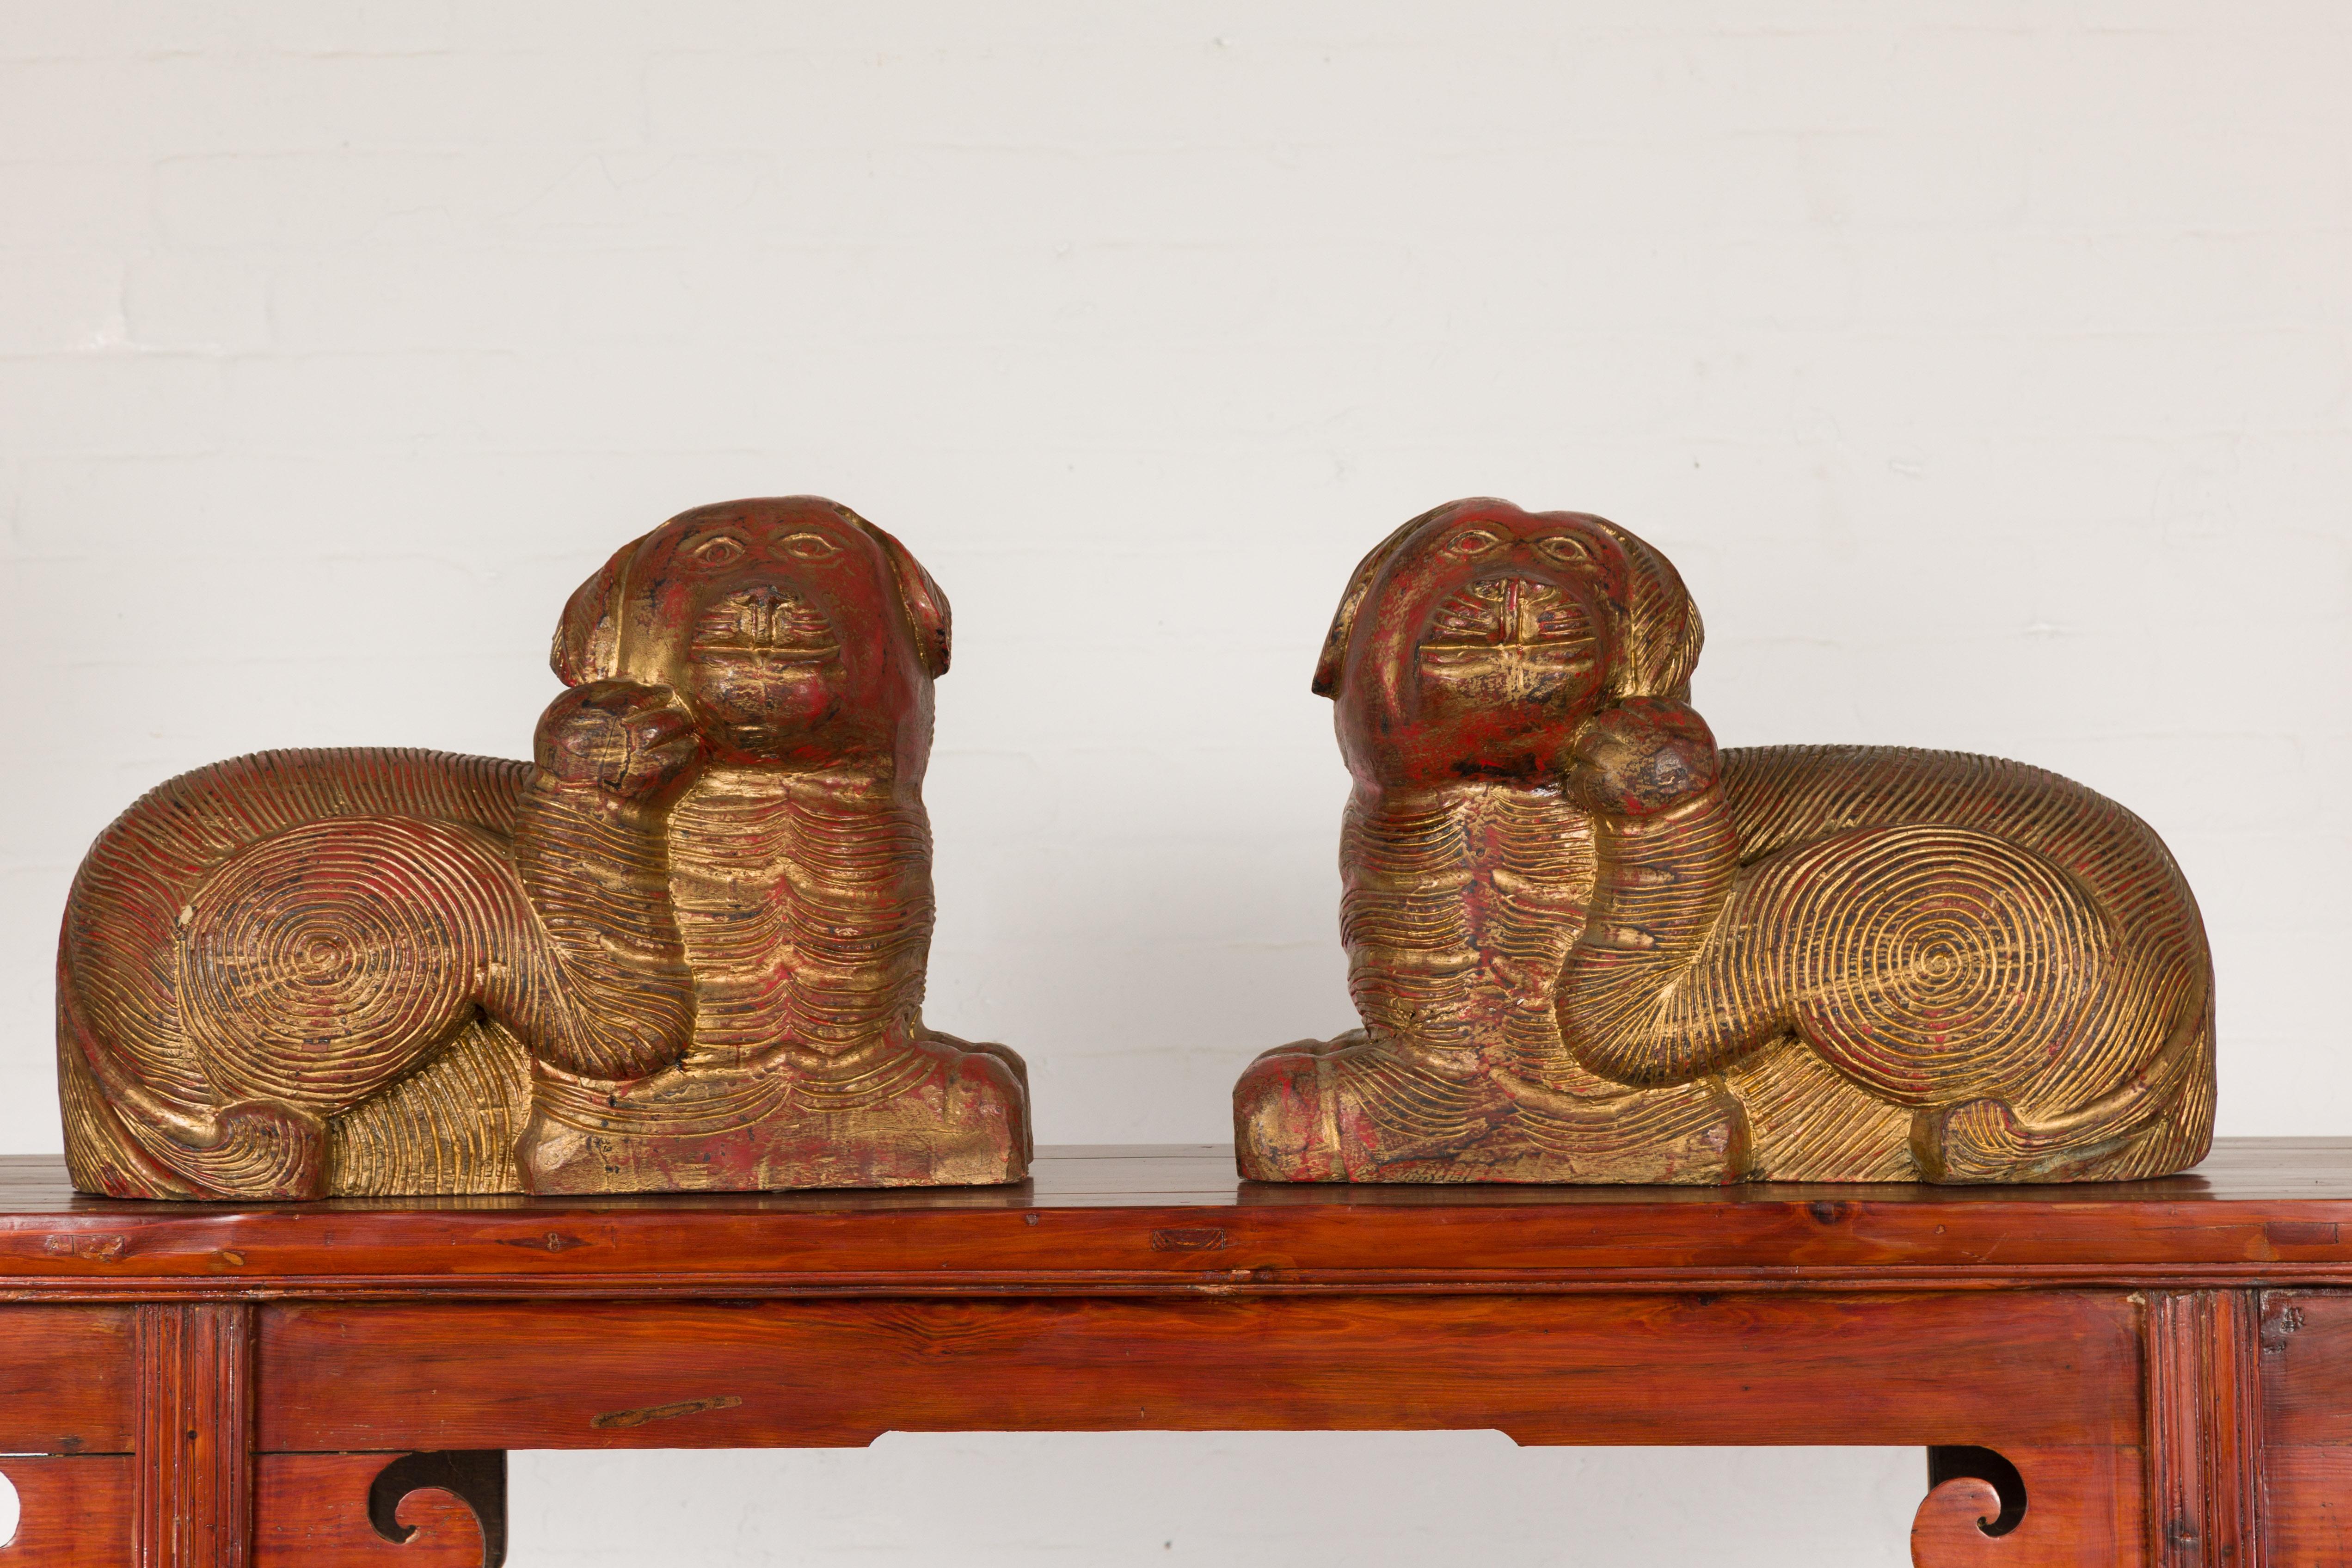 Pair of vintage Thai carved wooden pendant mythological creatures from the mid 20th century with gilt finish and red undertone. Unleash the allure of mythical charm with this exquisite pair of vintage Thai carved wooden creatures from the mid-20th